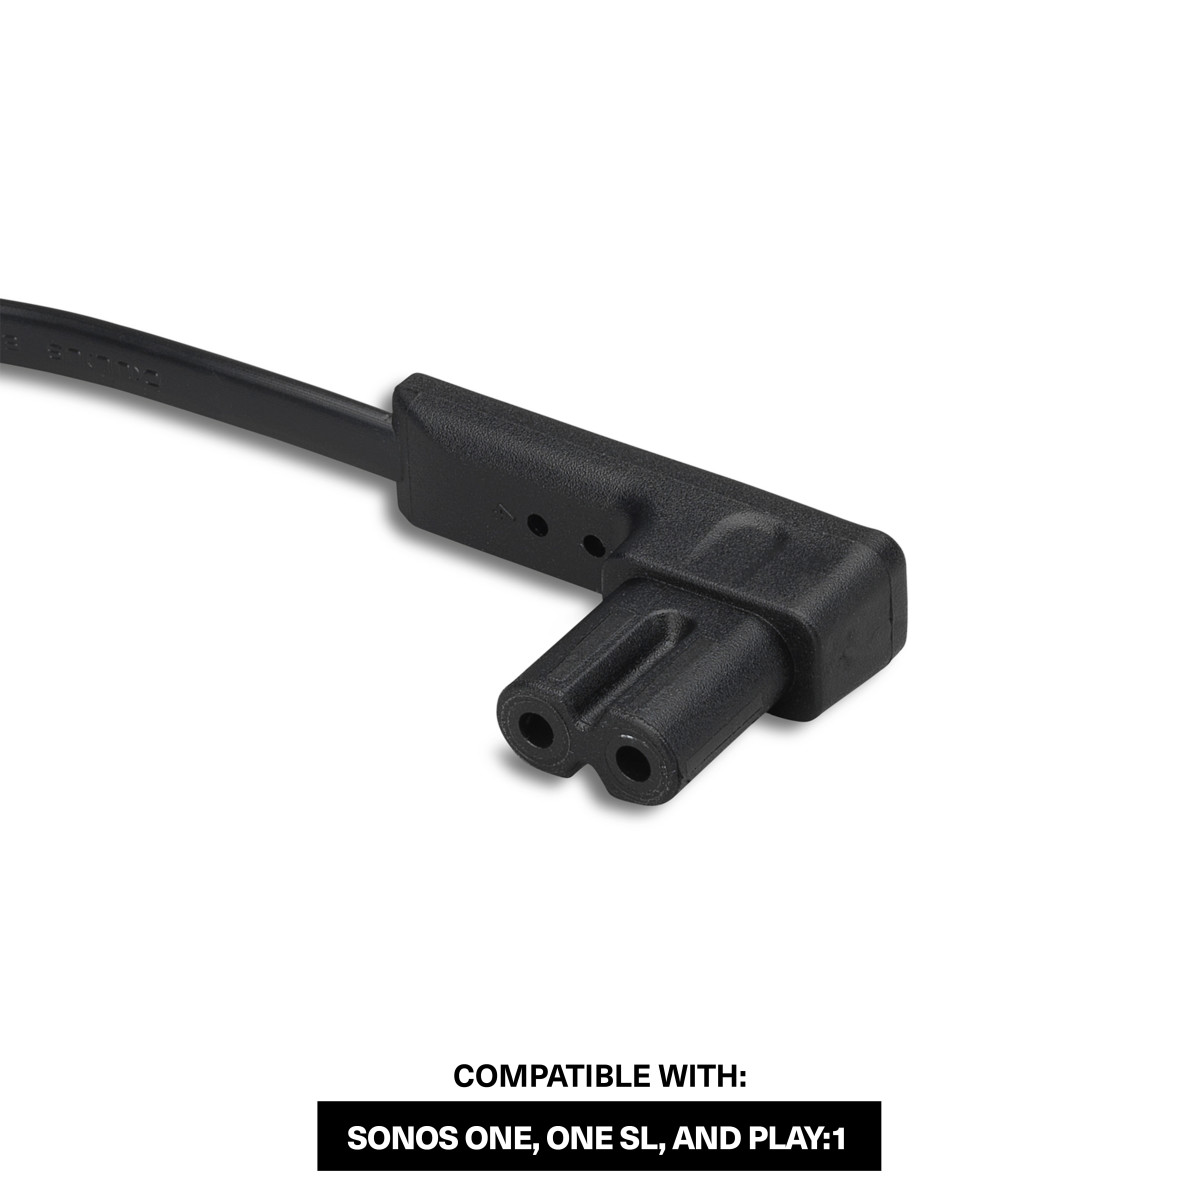 Power Cable 0.35m UK Black